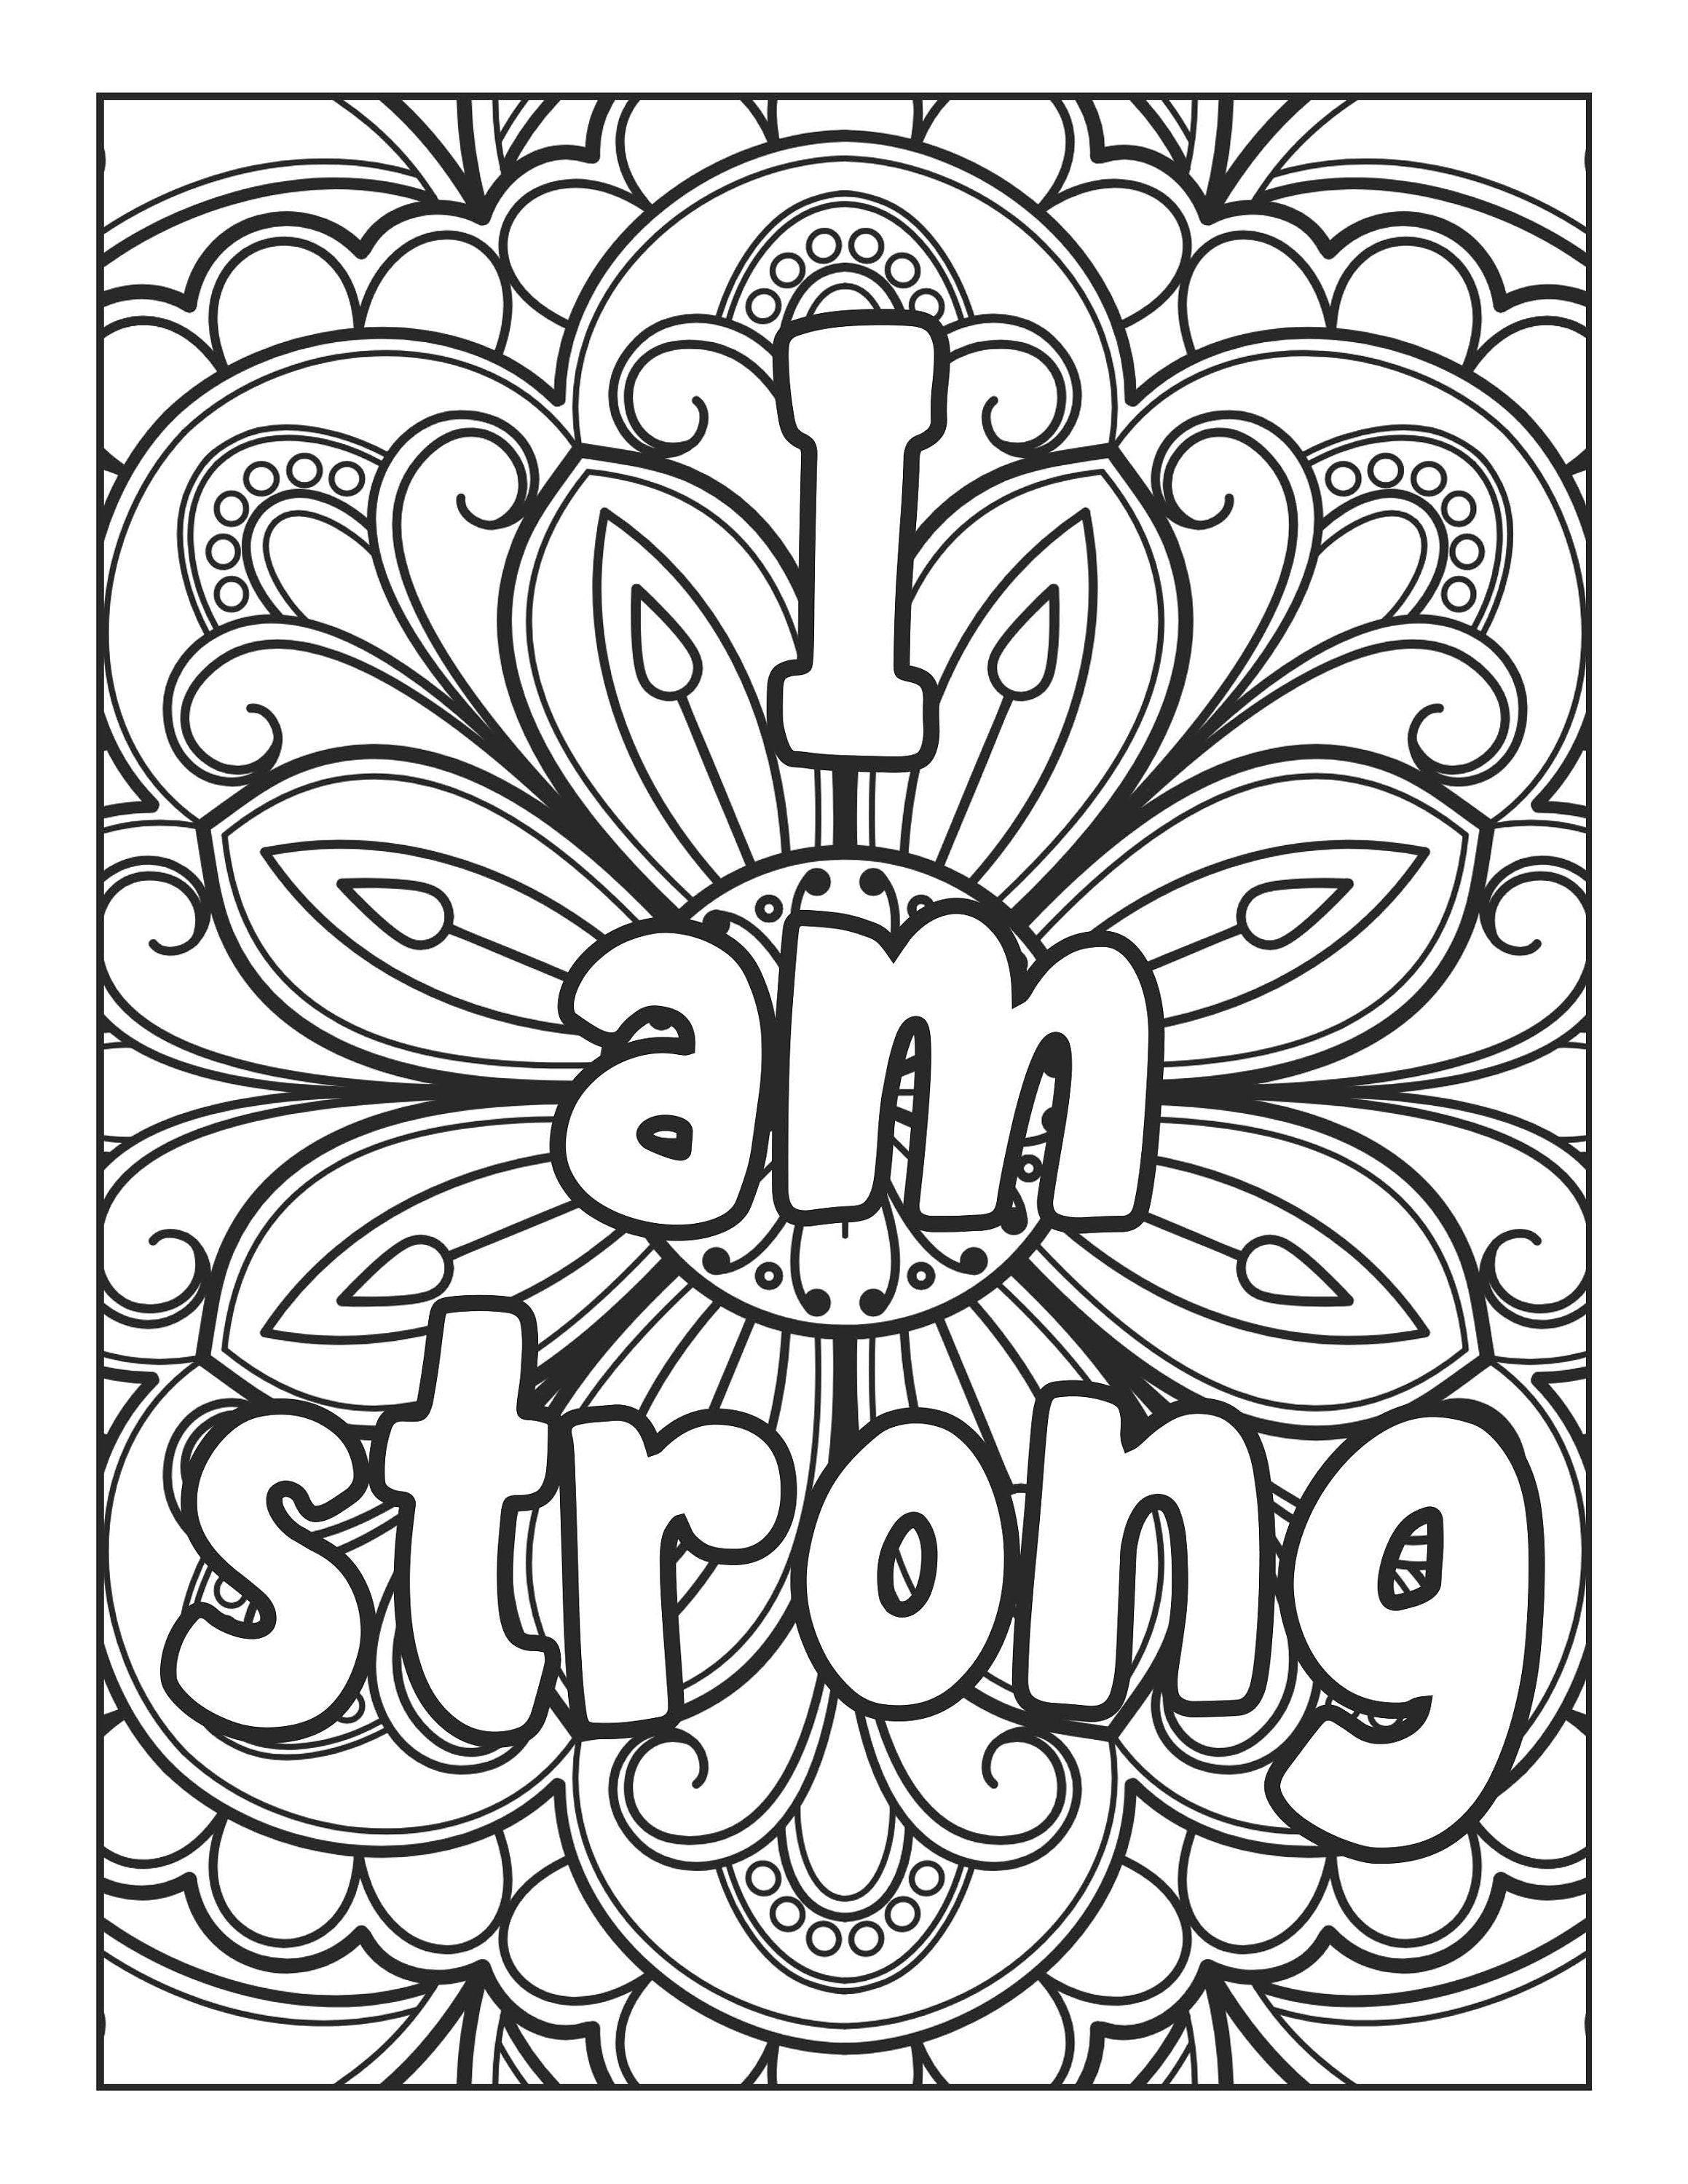 Teen Coloring Book GET INSPIRED!: Drawings with Encouraging and